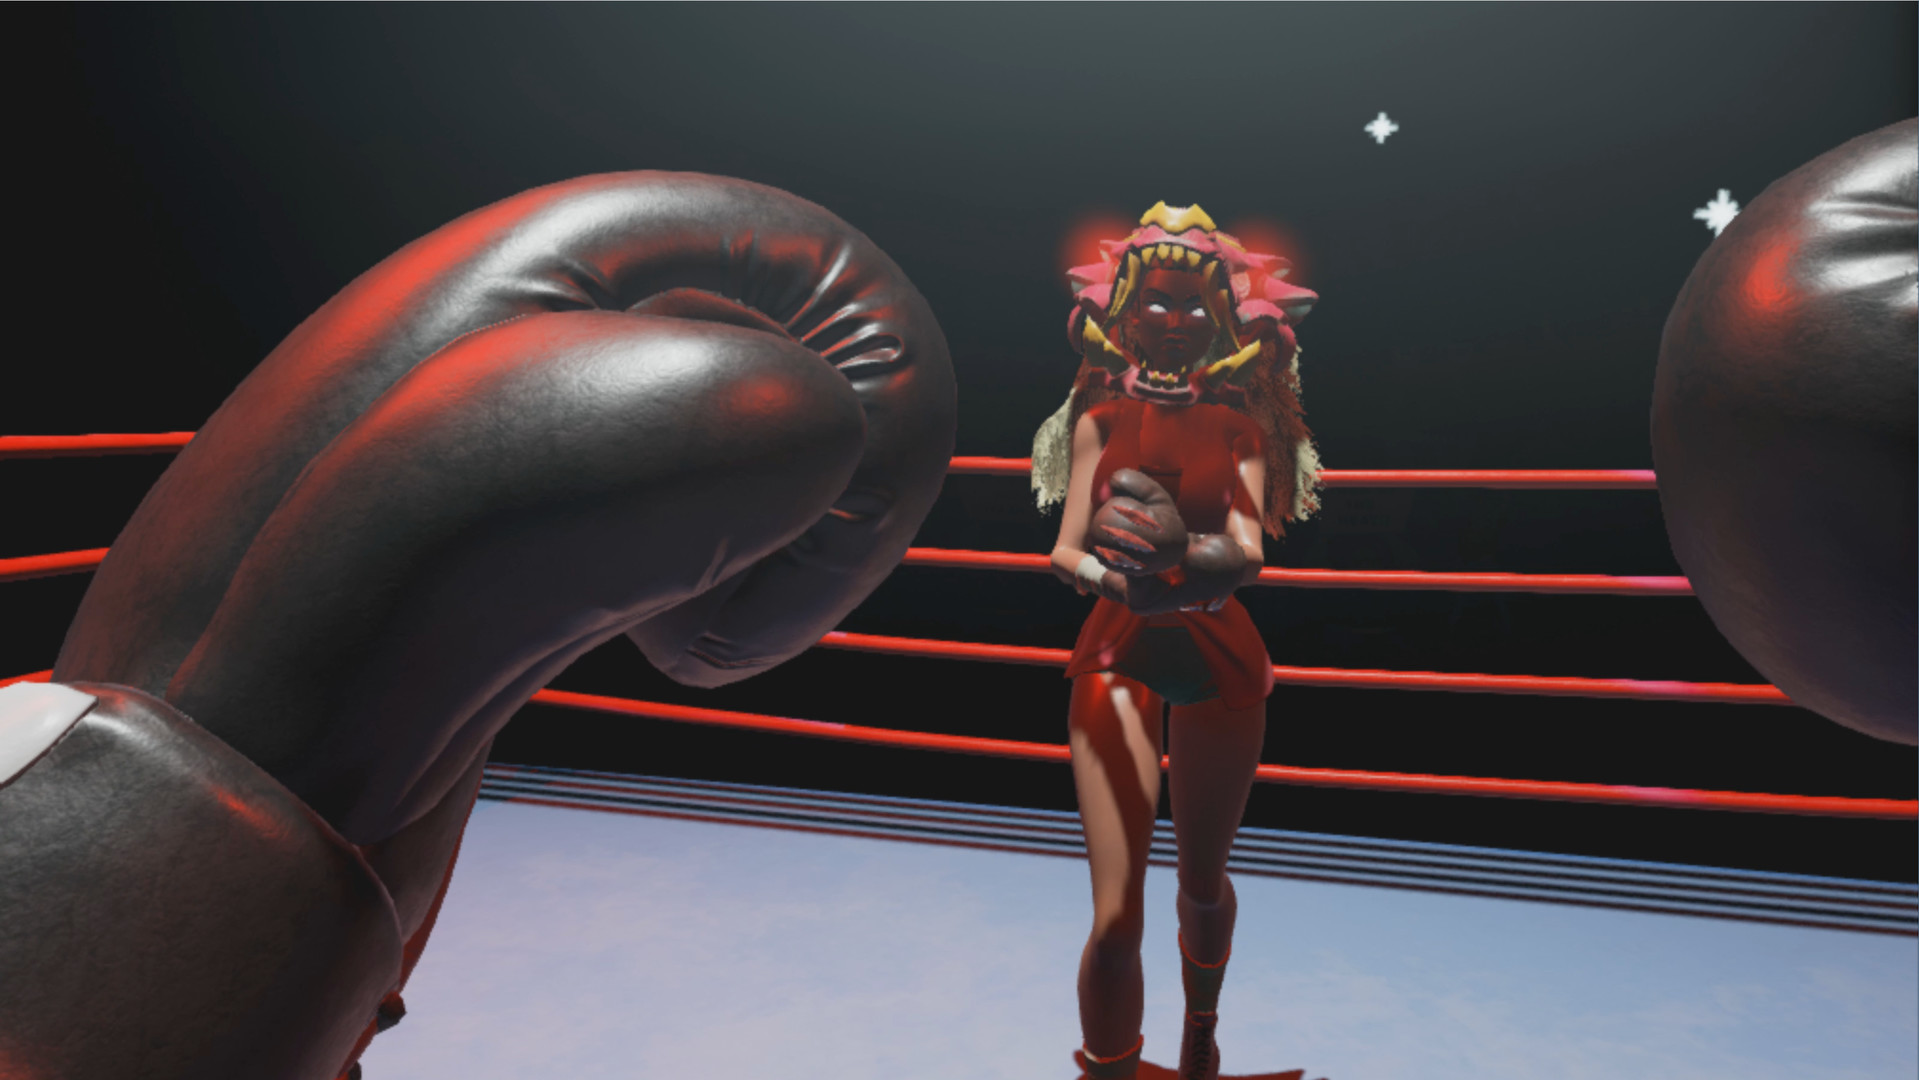 Knockout League - Arcade VR Boxing on Steam